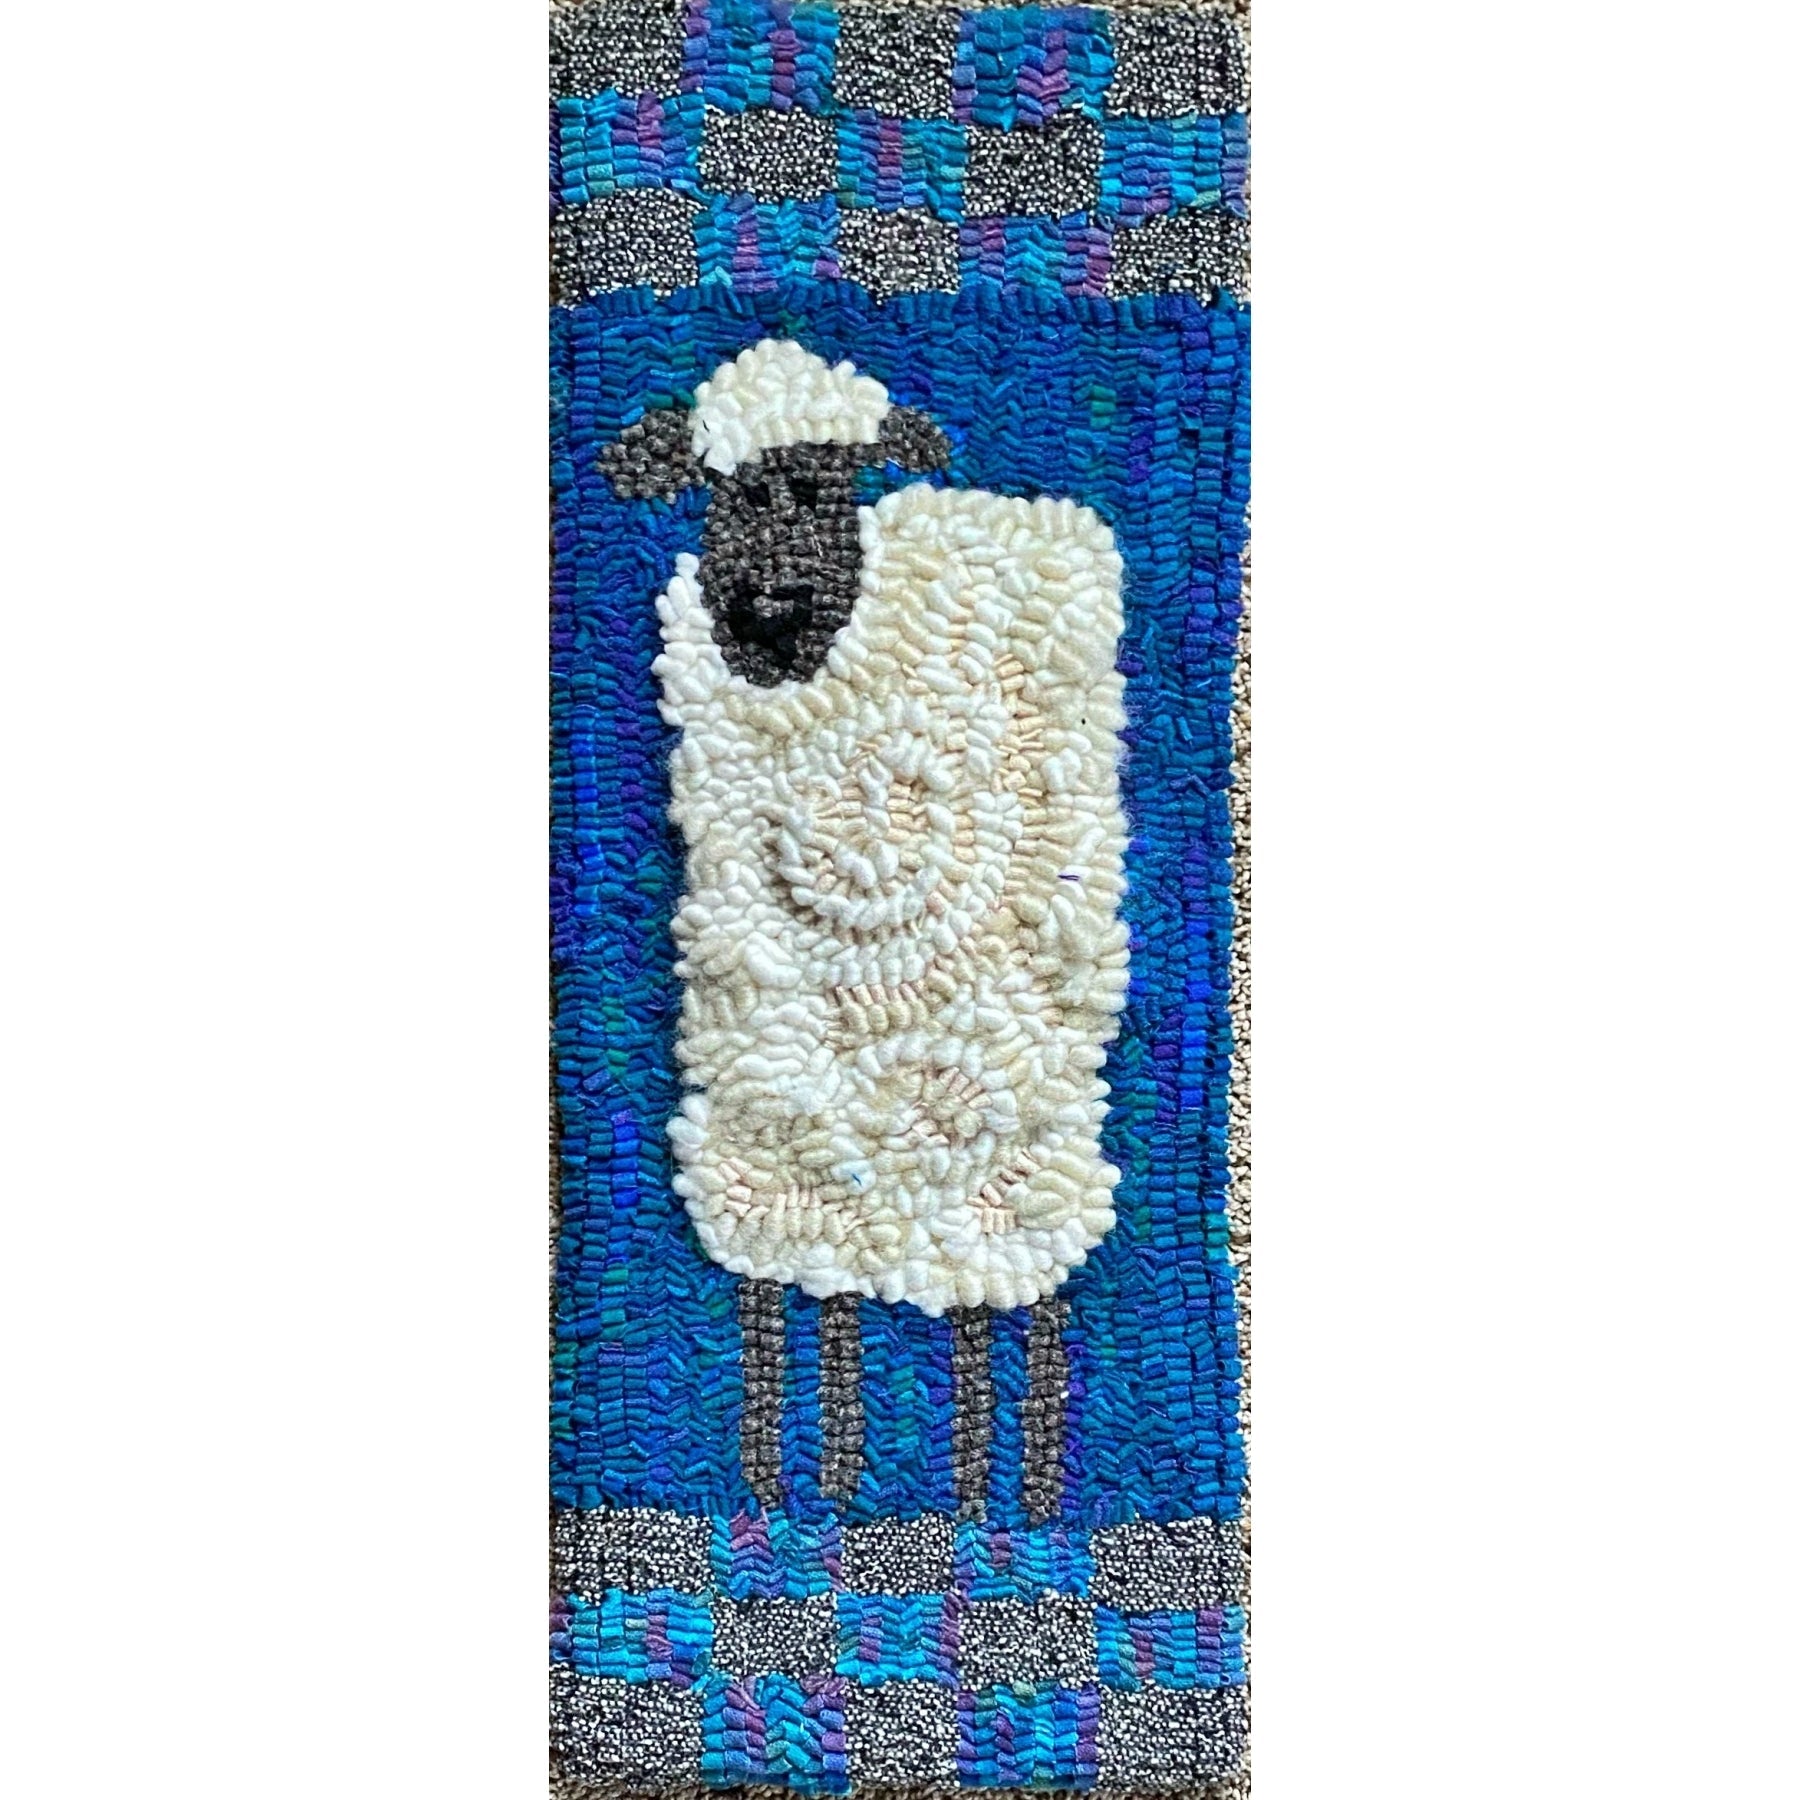 Baa, rug hooked by Laura Rose